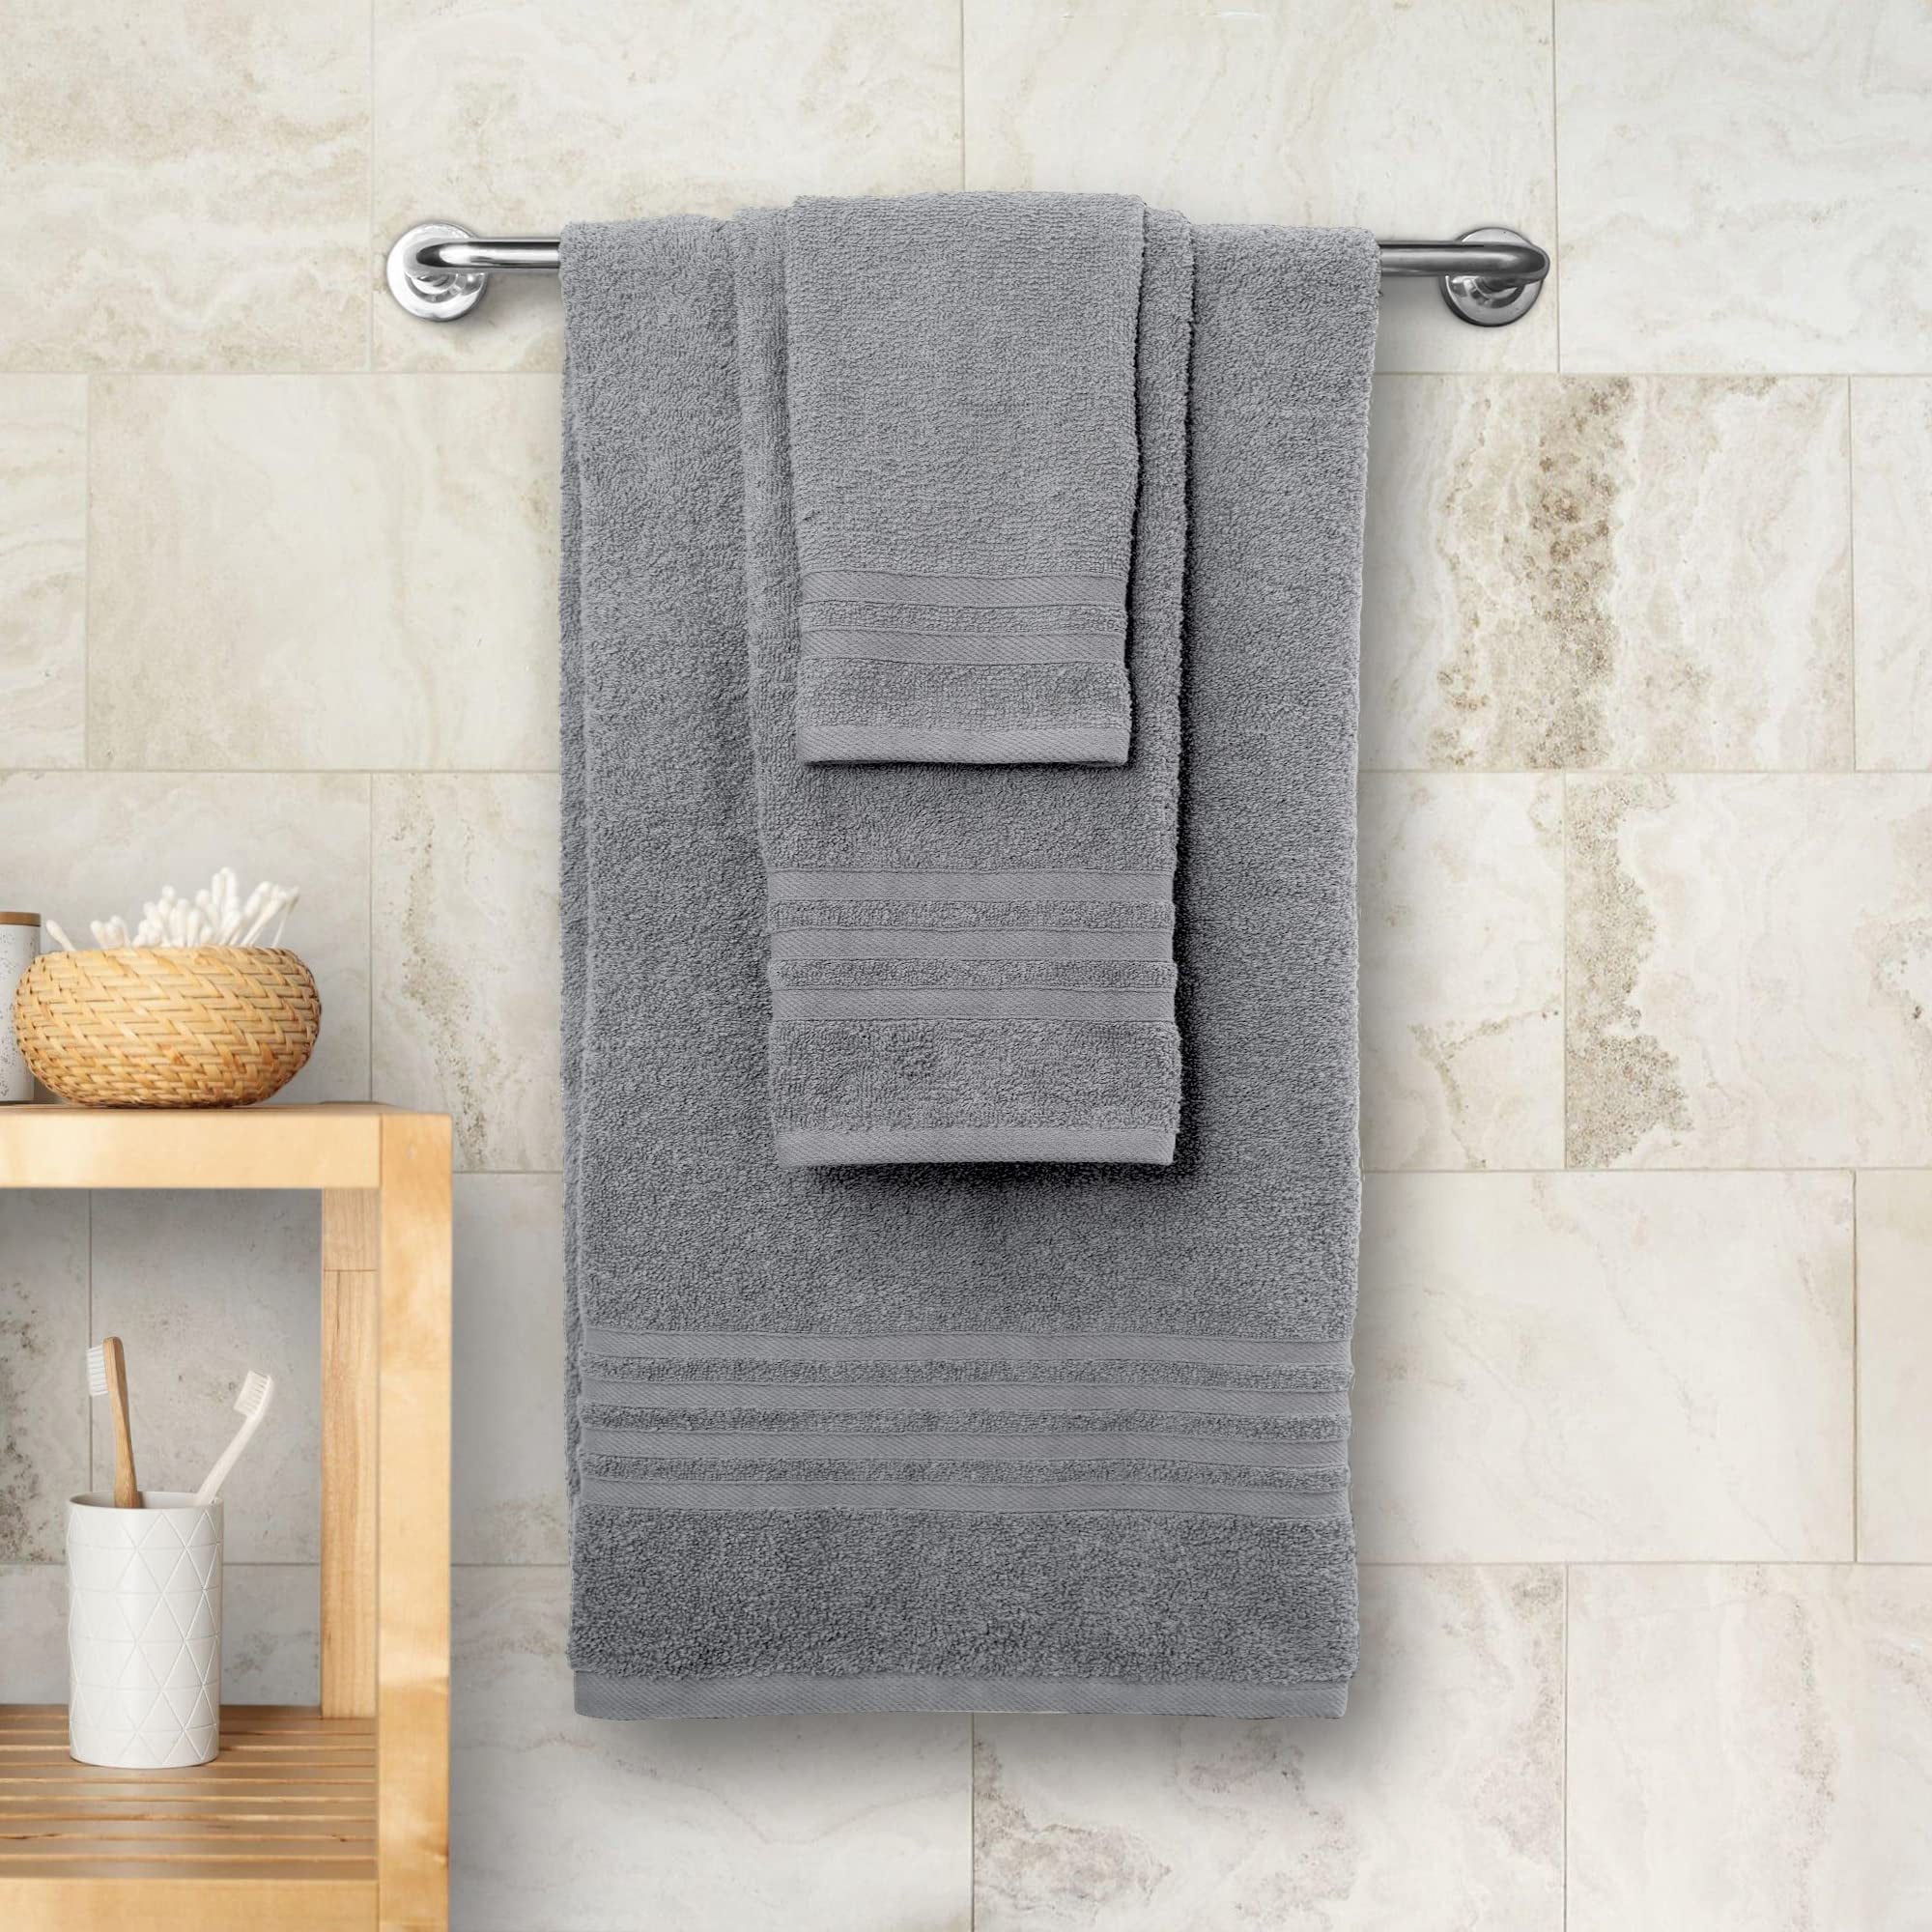 W Hotels Angle Bath Towel Set - 100% Cotton - White - Includes 2 Bath  Towels, 2 Hand Towels and 2 Washcloths